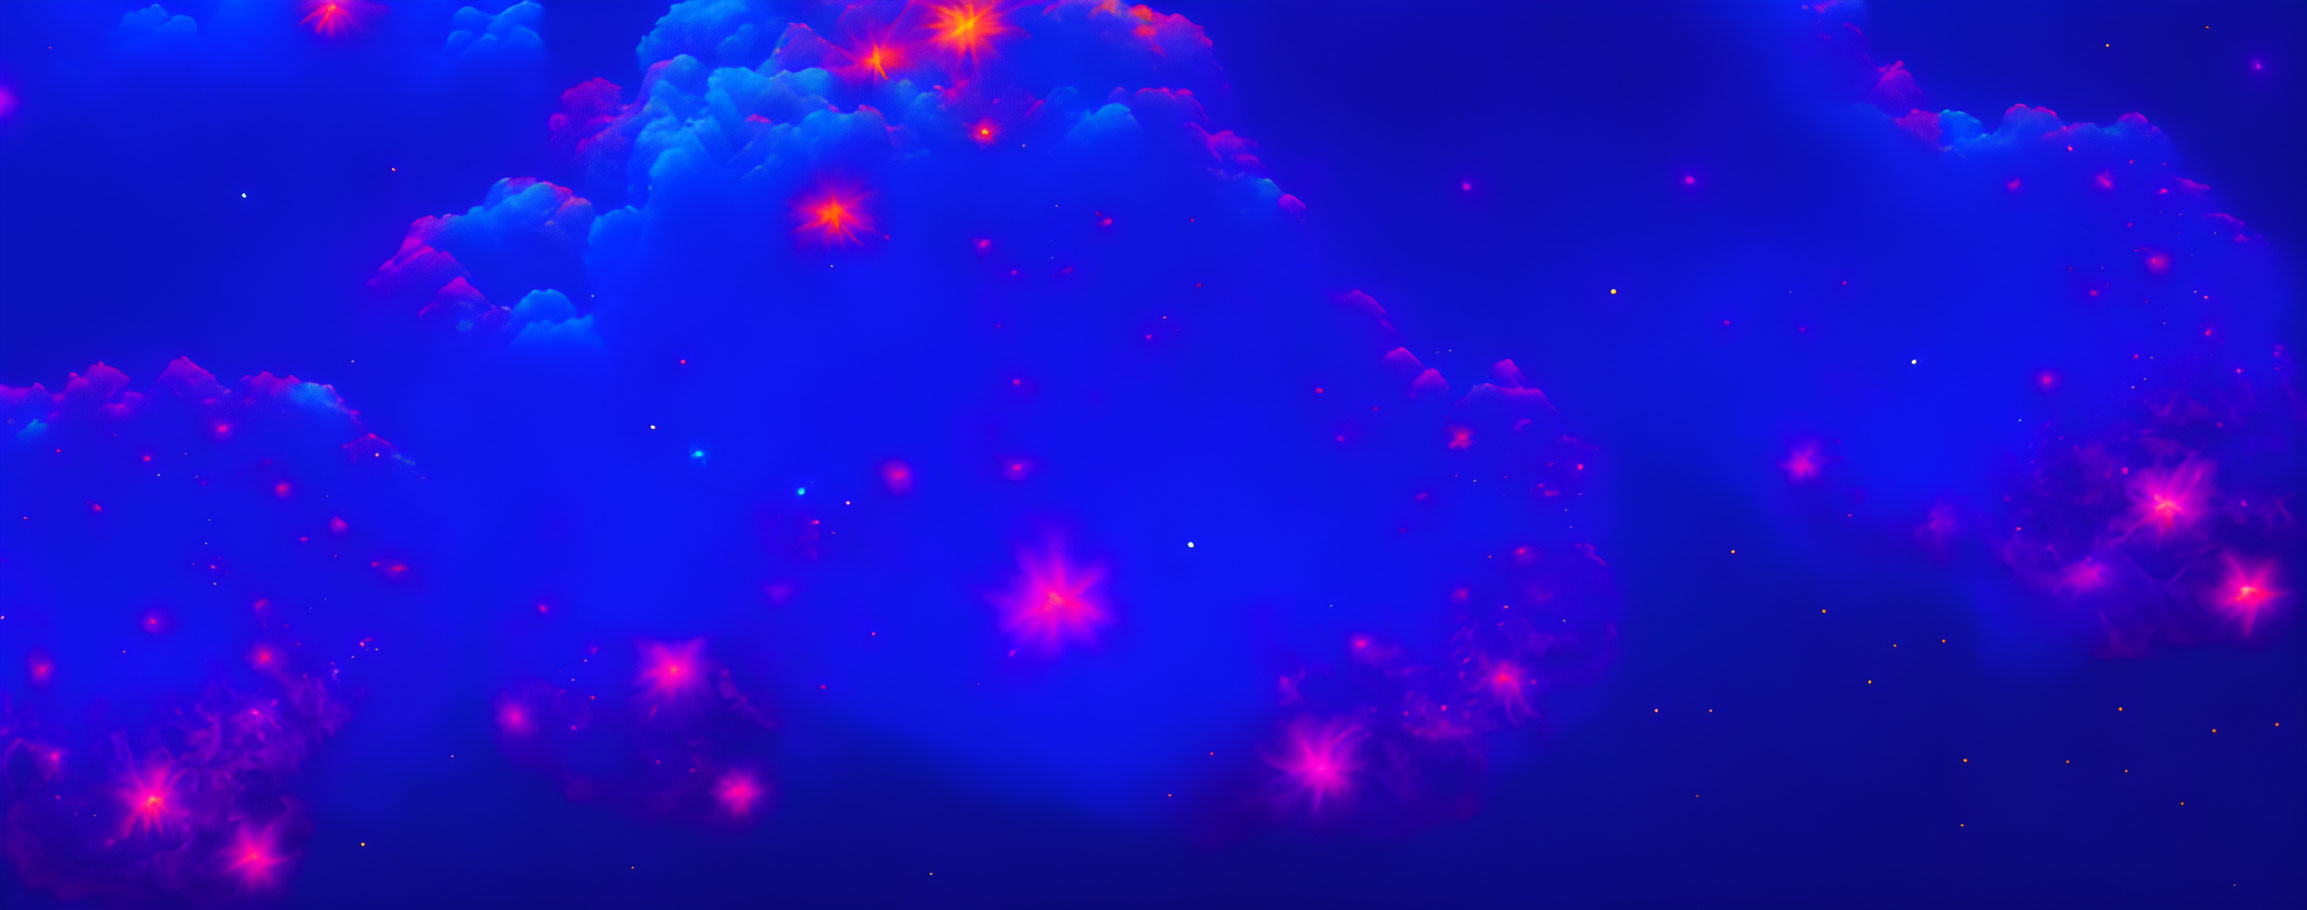 Colorful digital artwork: Neon clouds, red stars